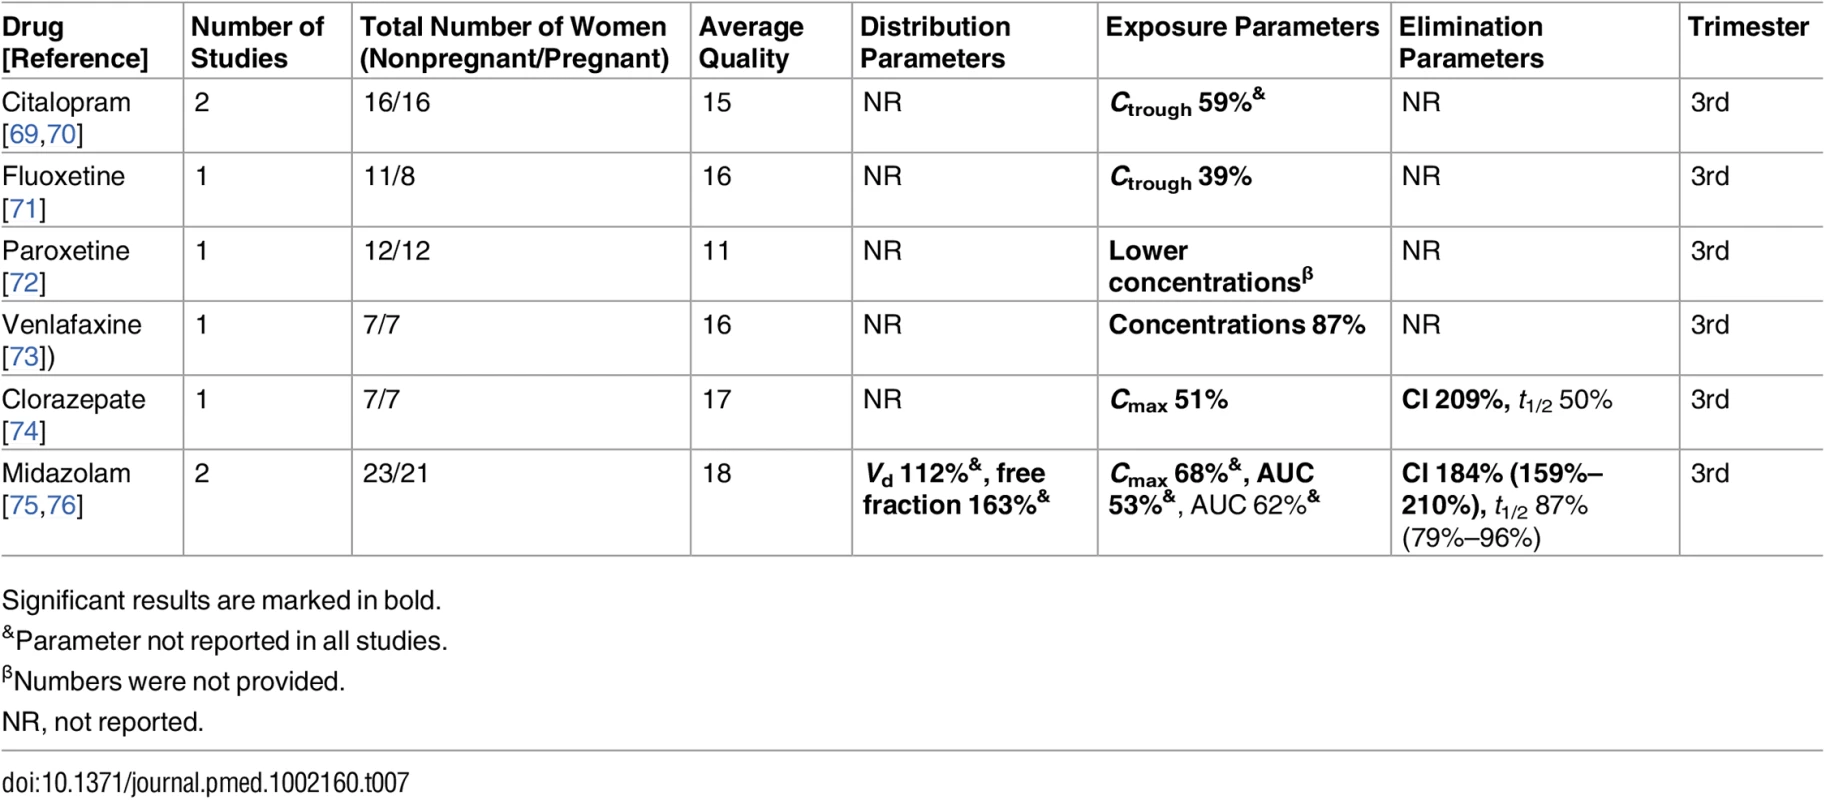 Antidepressant/anxiolytic drugs: consistent/single studies of pregnancy associated pharmacokinetic changes (percent calculated as pregnant/nonpregnant values).